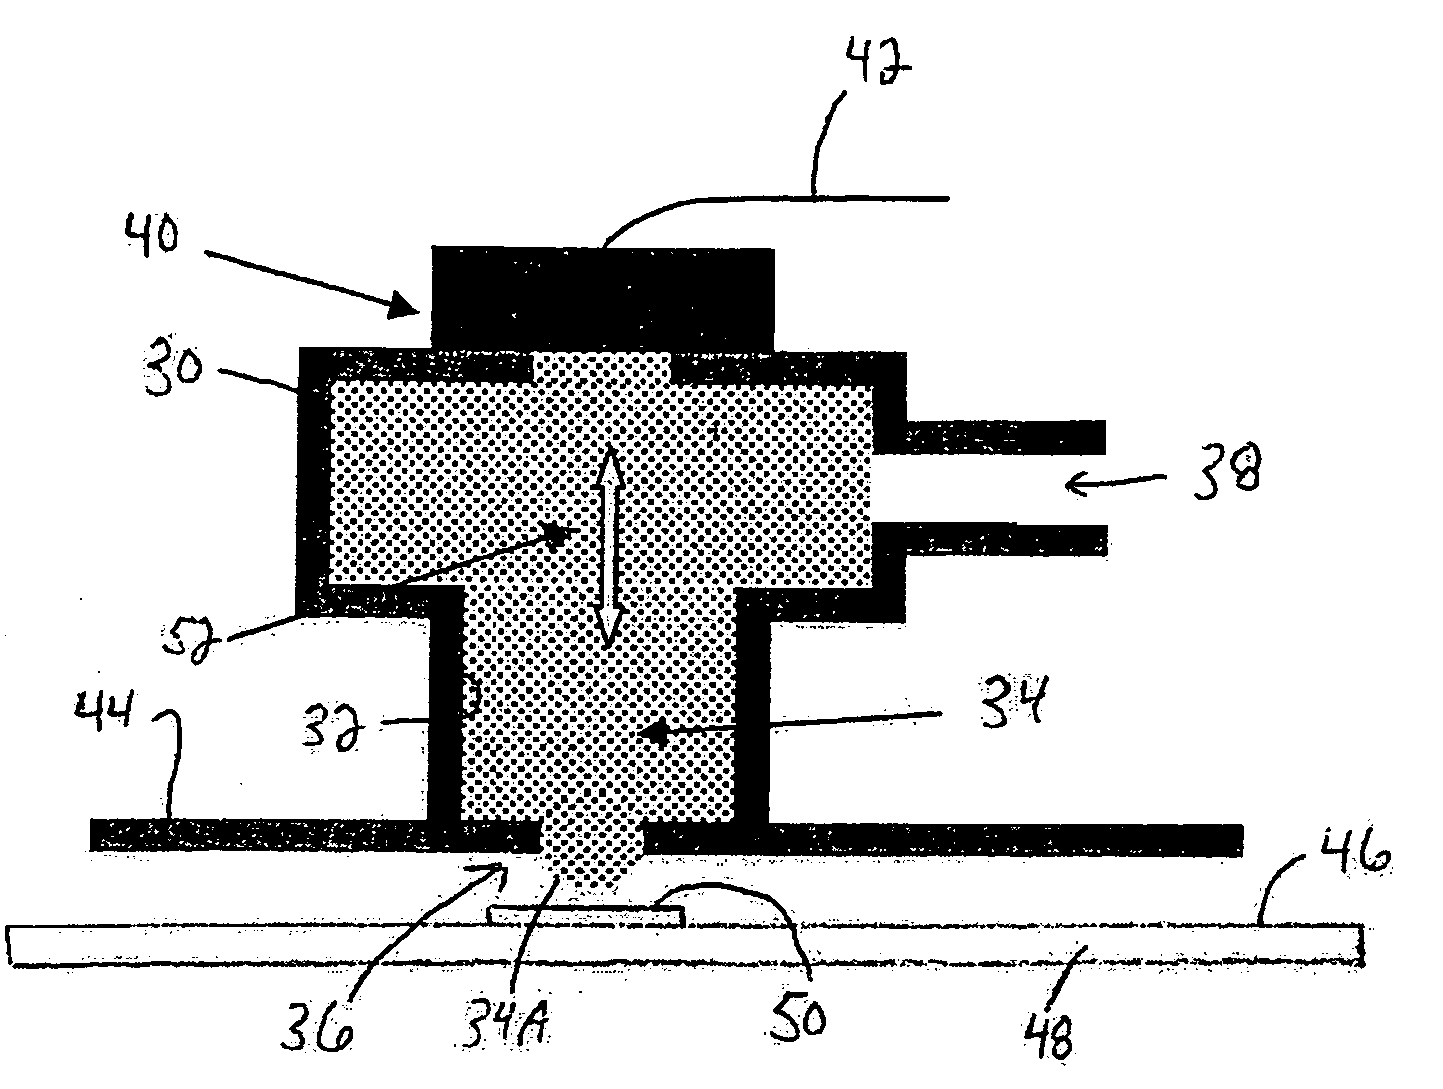 Tools and methods for forming conductive bumps on microelectronic elements